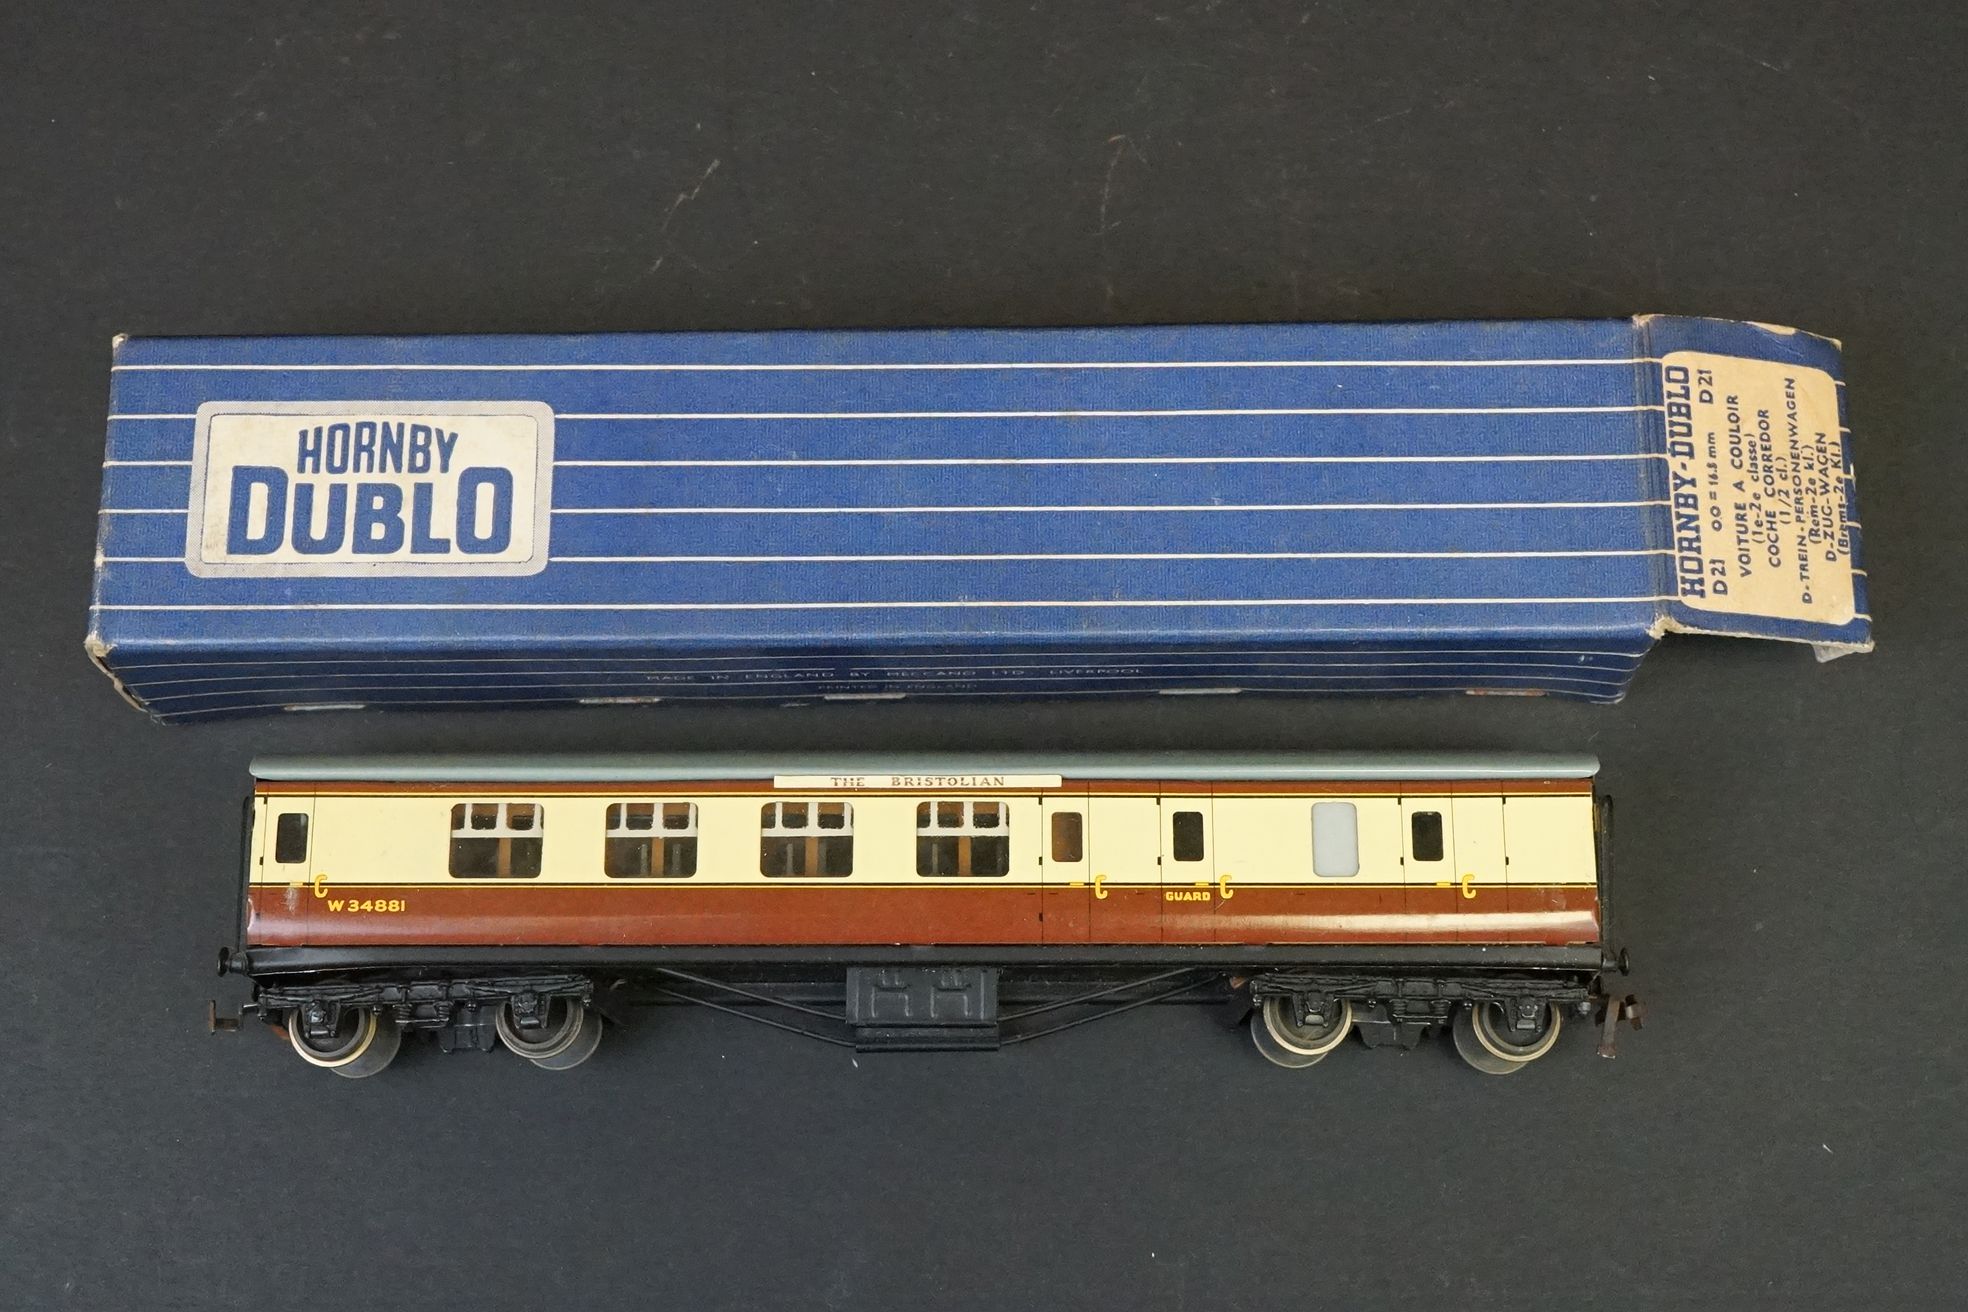 Group of OO & Hornby Dublo model railway to include boxed Hornby Dublo 2218 2-6-4 Tank Locomotive, - Image 10 of 13